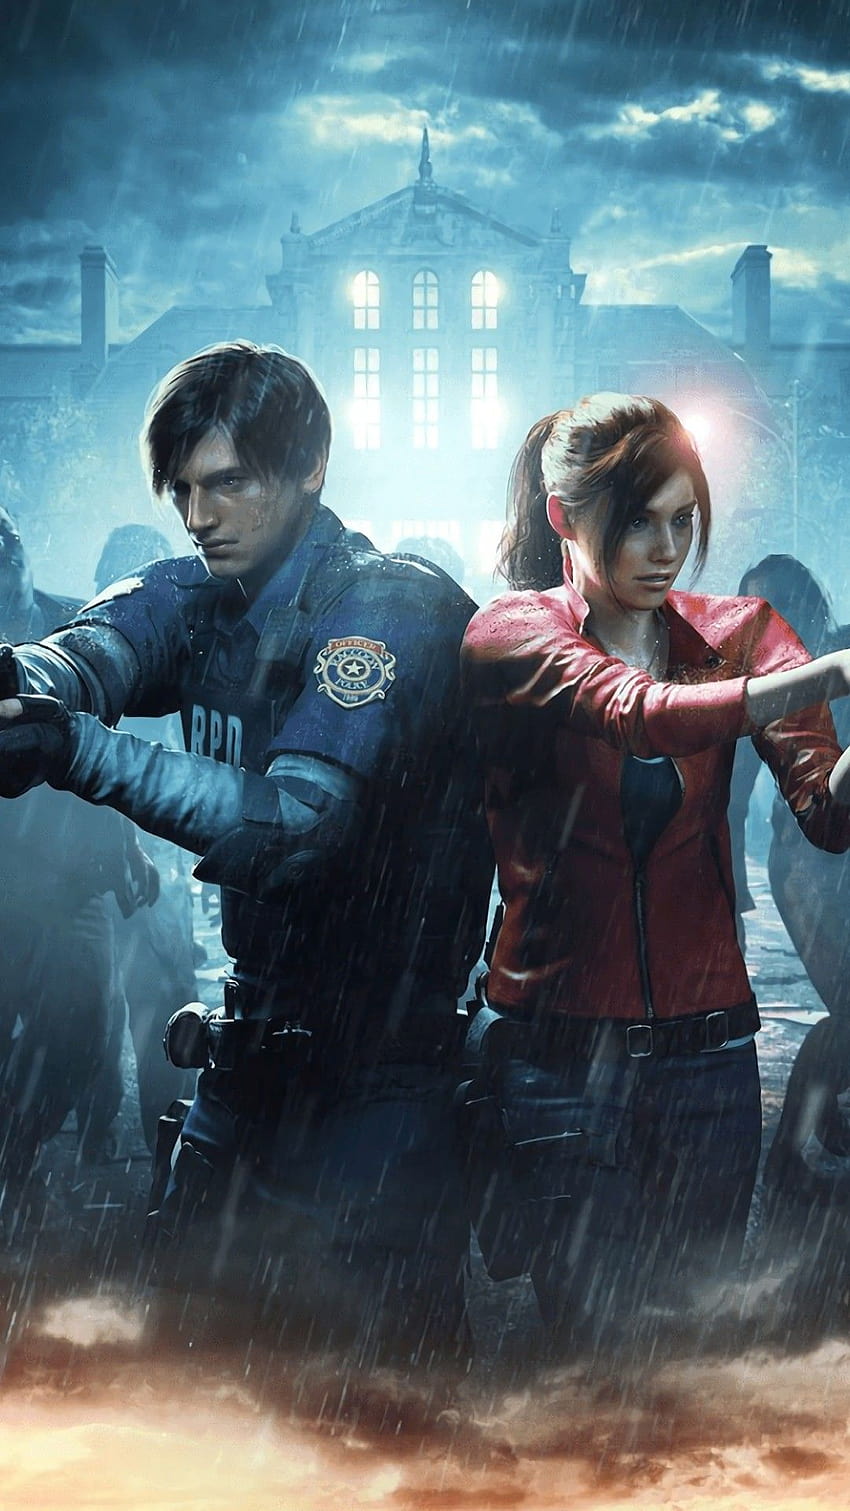 Resident Evil 2 2019 Game iPhone 6 Plus, iphone game HD phone wallpaper